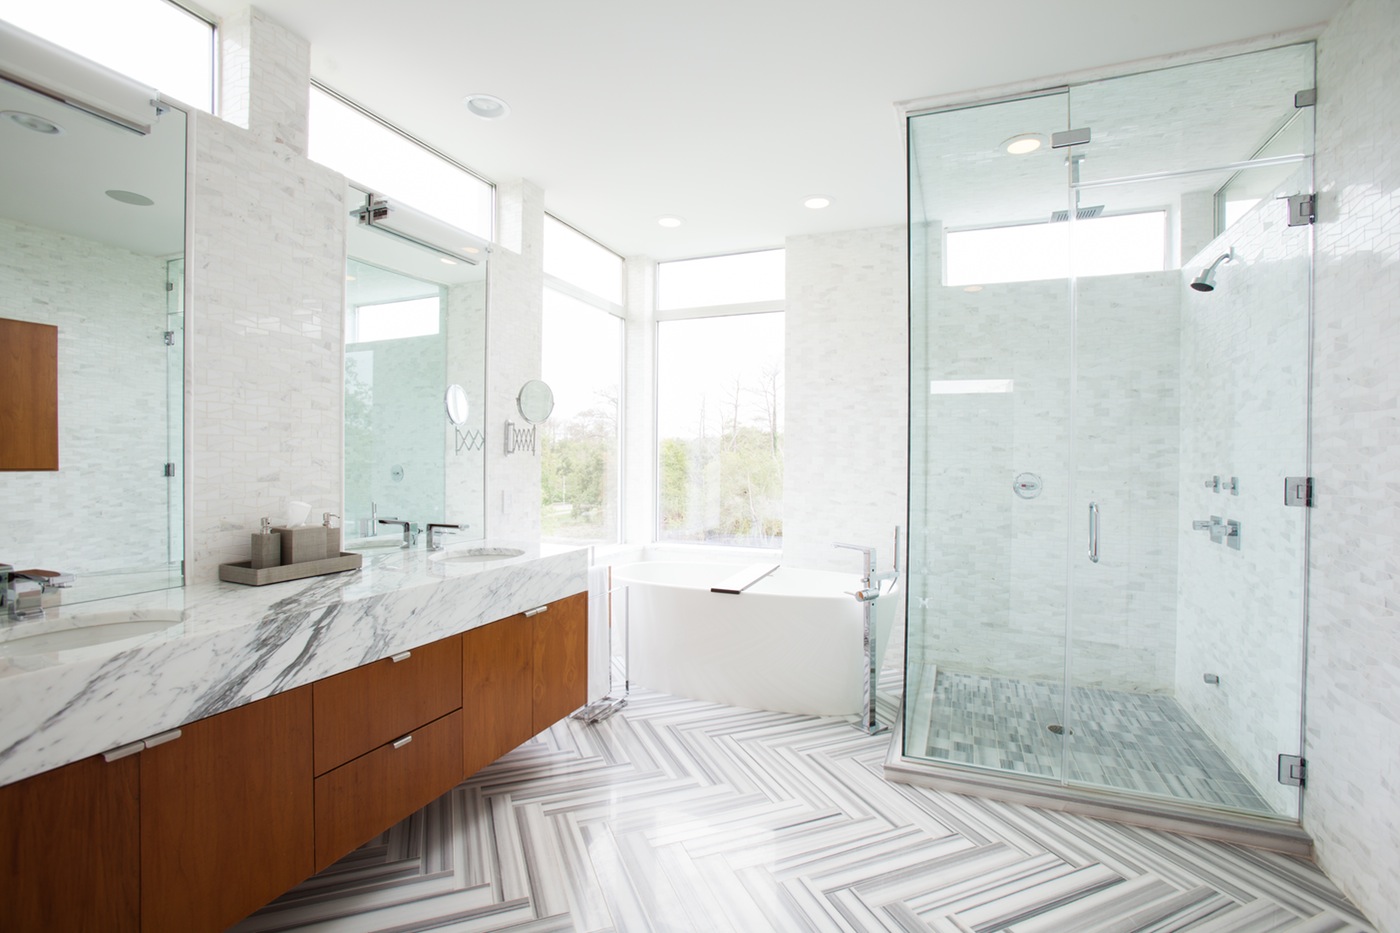 A spacious bathroom featuring a large-sized shower area with a walk-in shower and wood vanity.